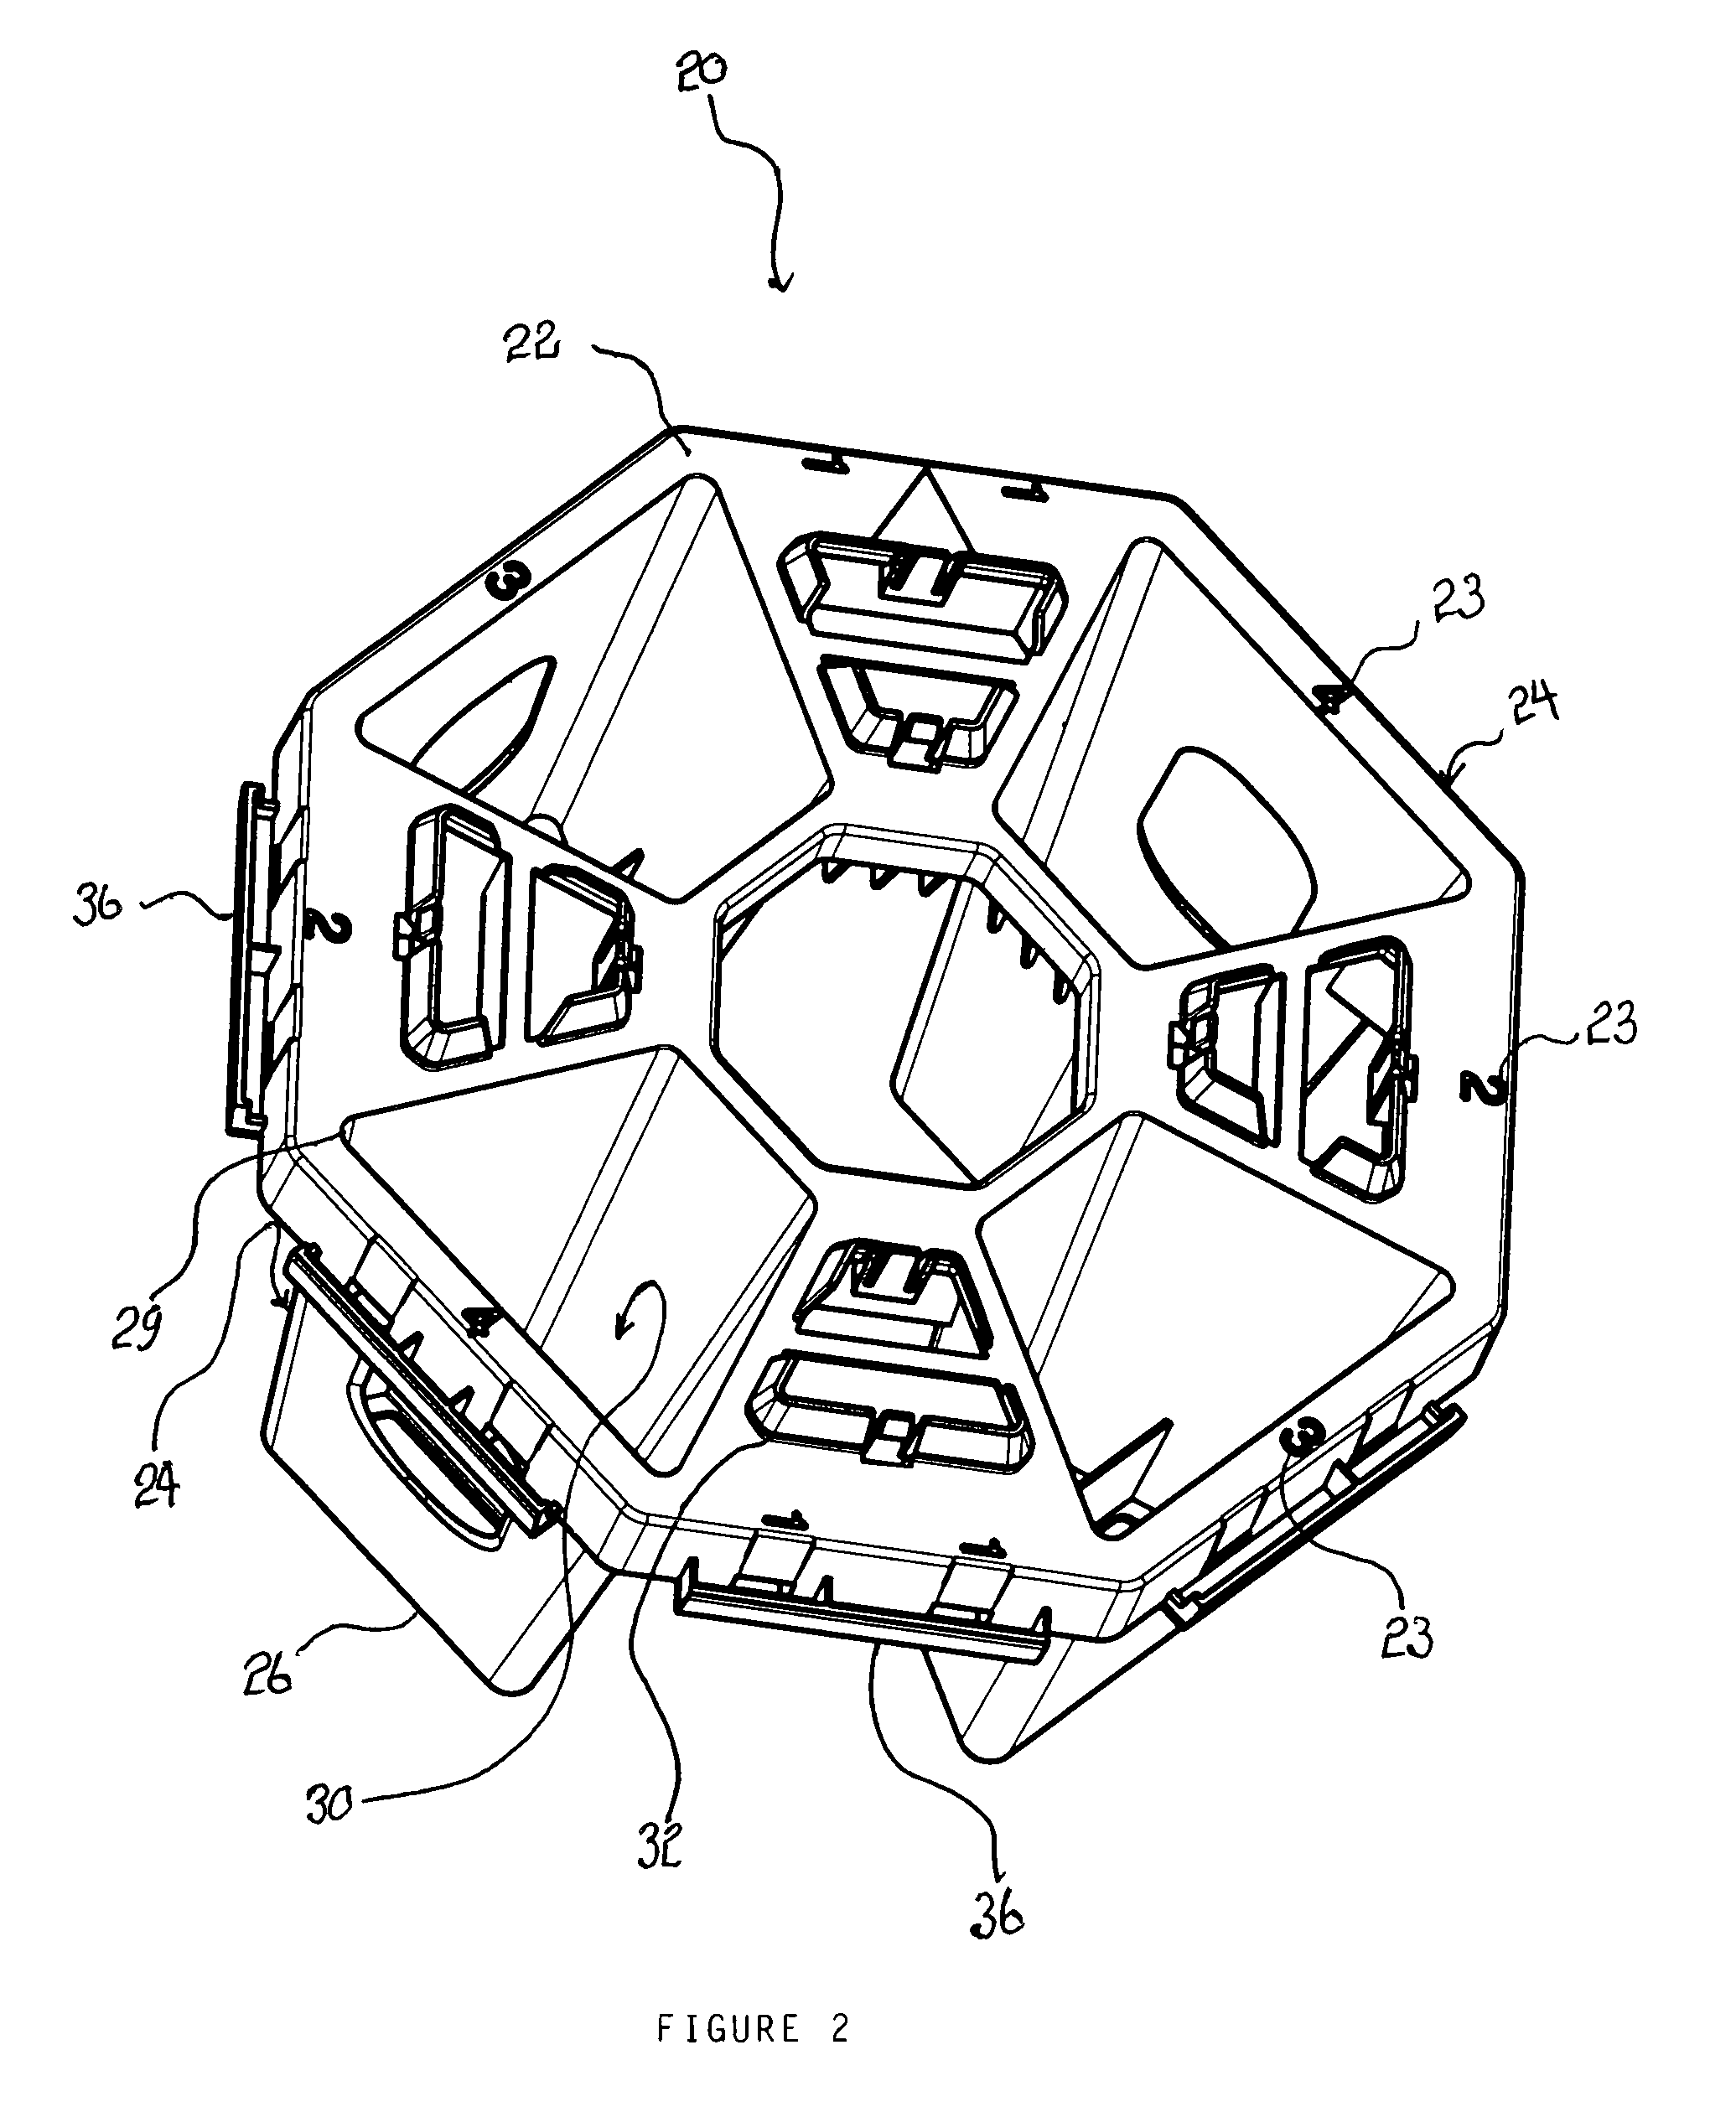 Modulated structural cell for supporting a tree root network